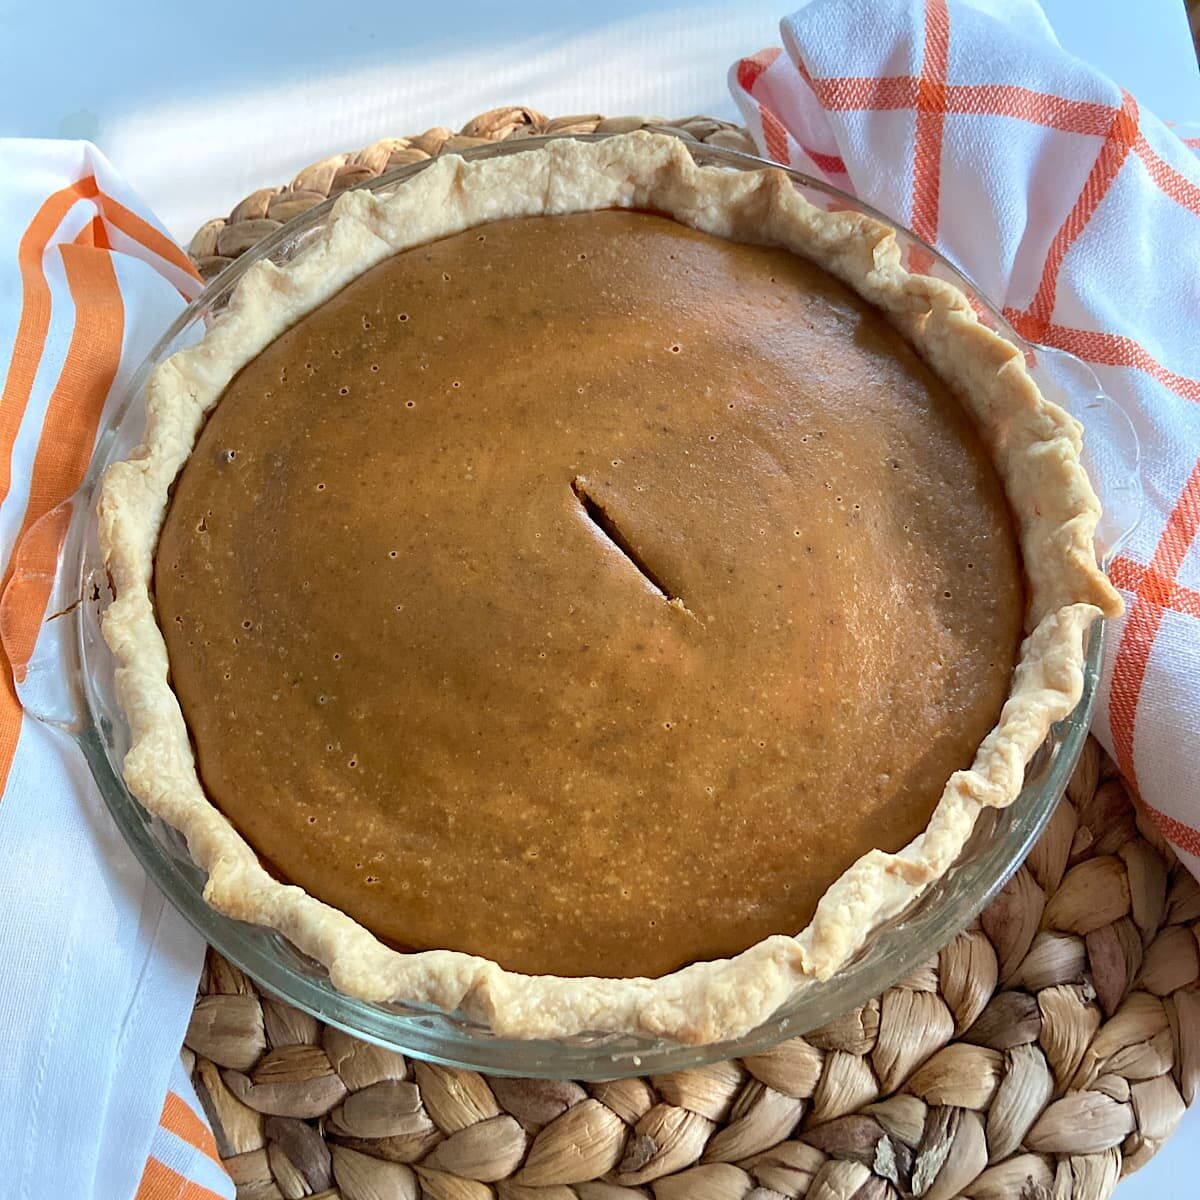 homemade pumpkin pie from the oven